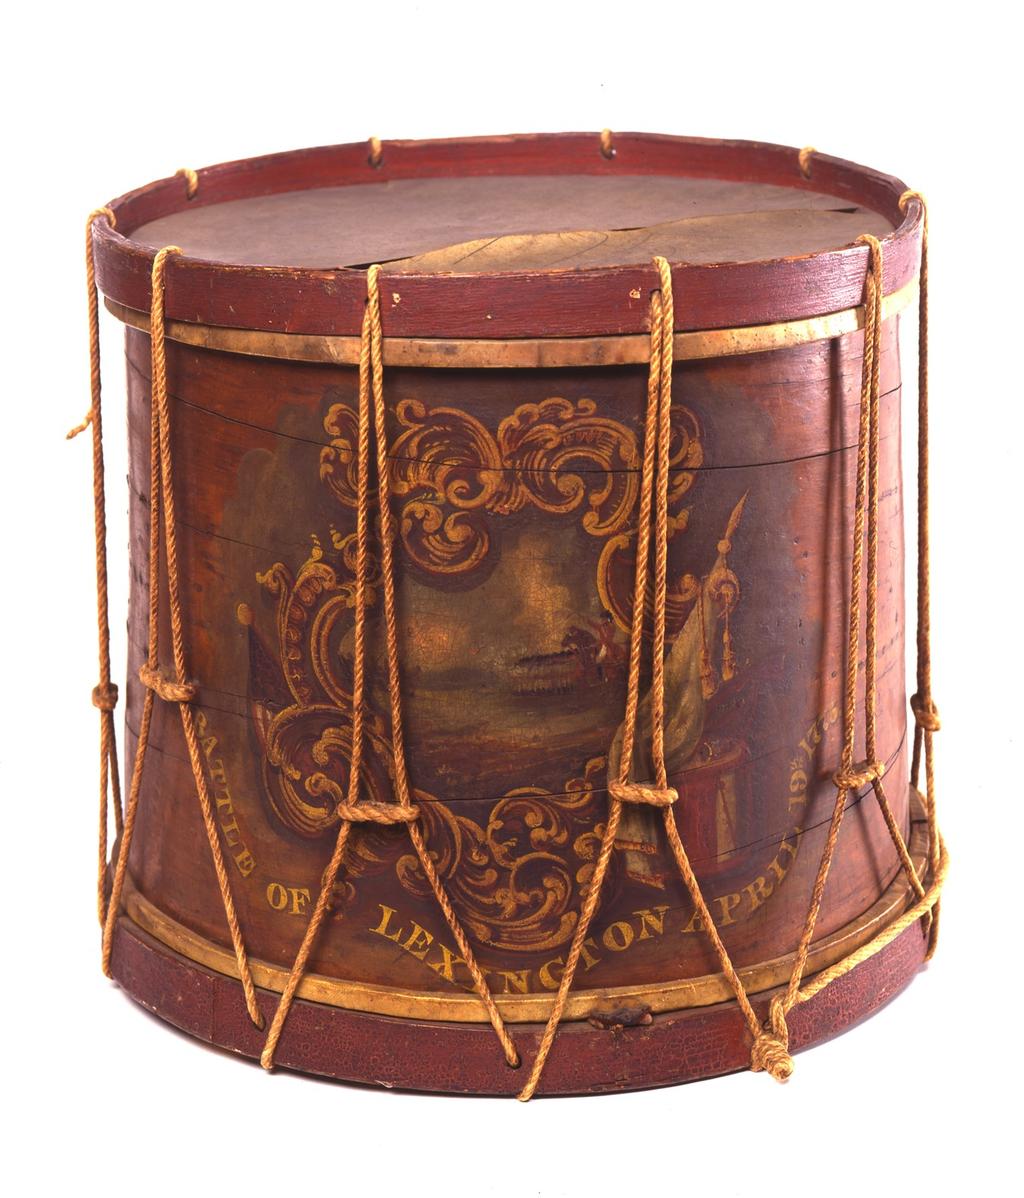 William Diamond Drum 1775 This drum was used by 19-year-old drummer William Diamond to call the Lexington militia to